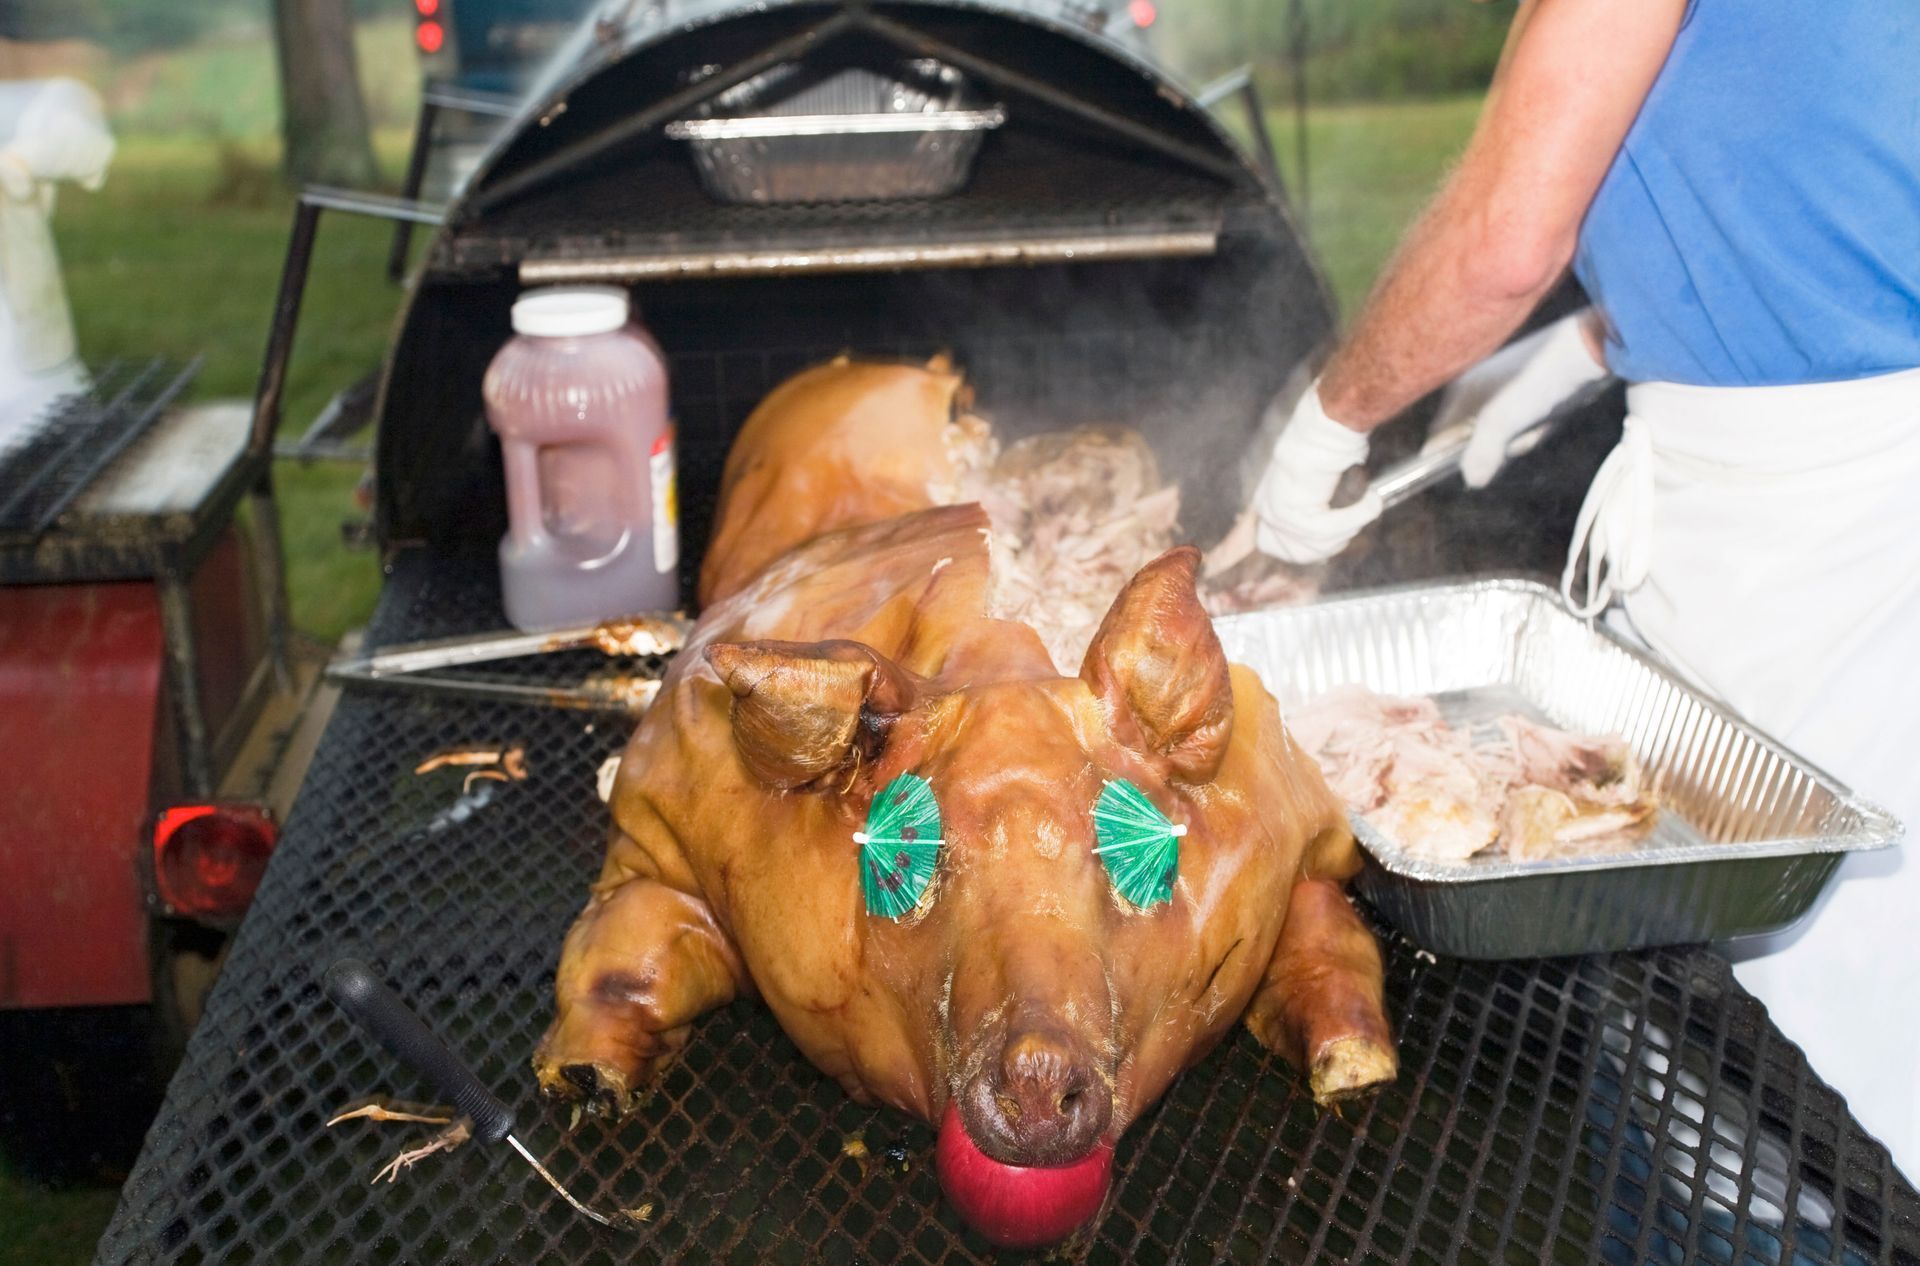 A pig with a red ball in its mouth is being cooked on a grill.